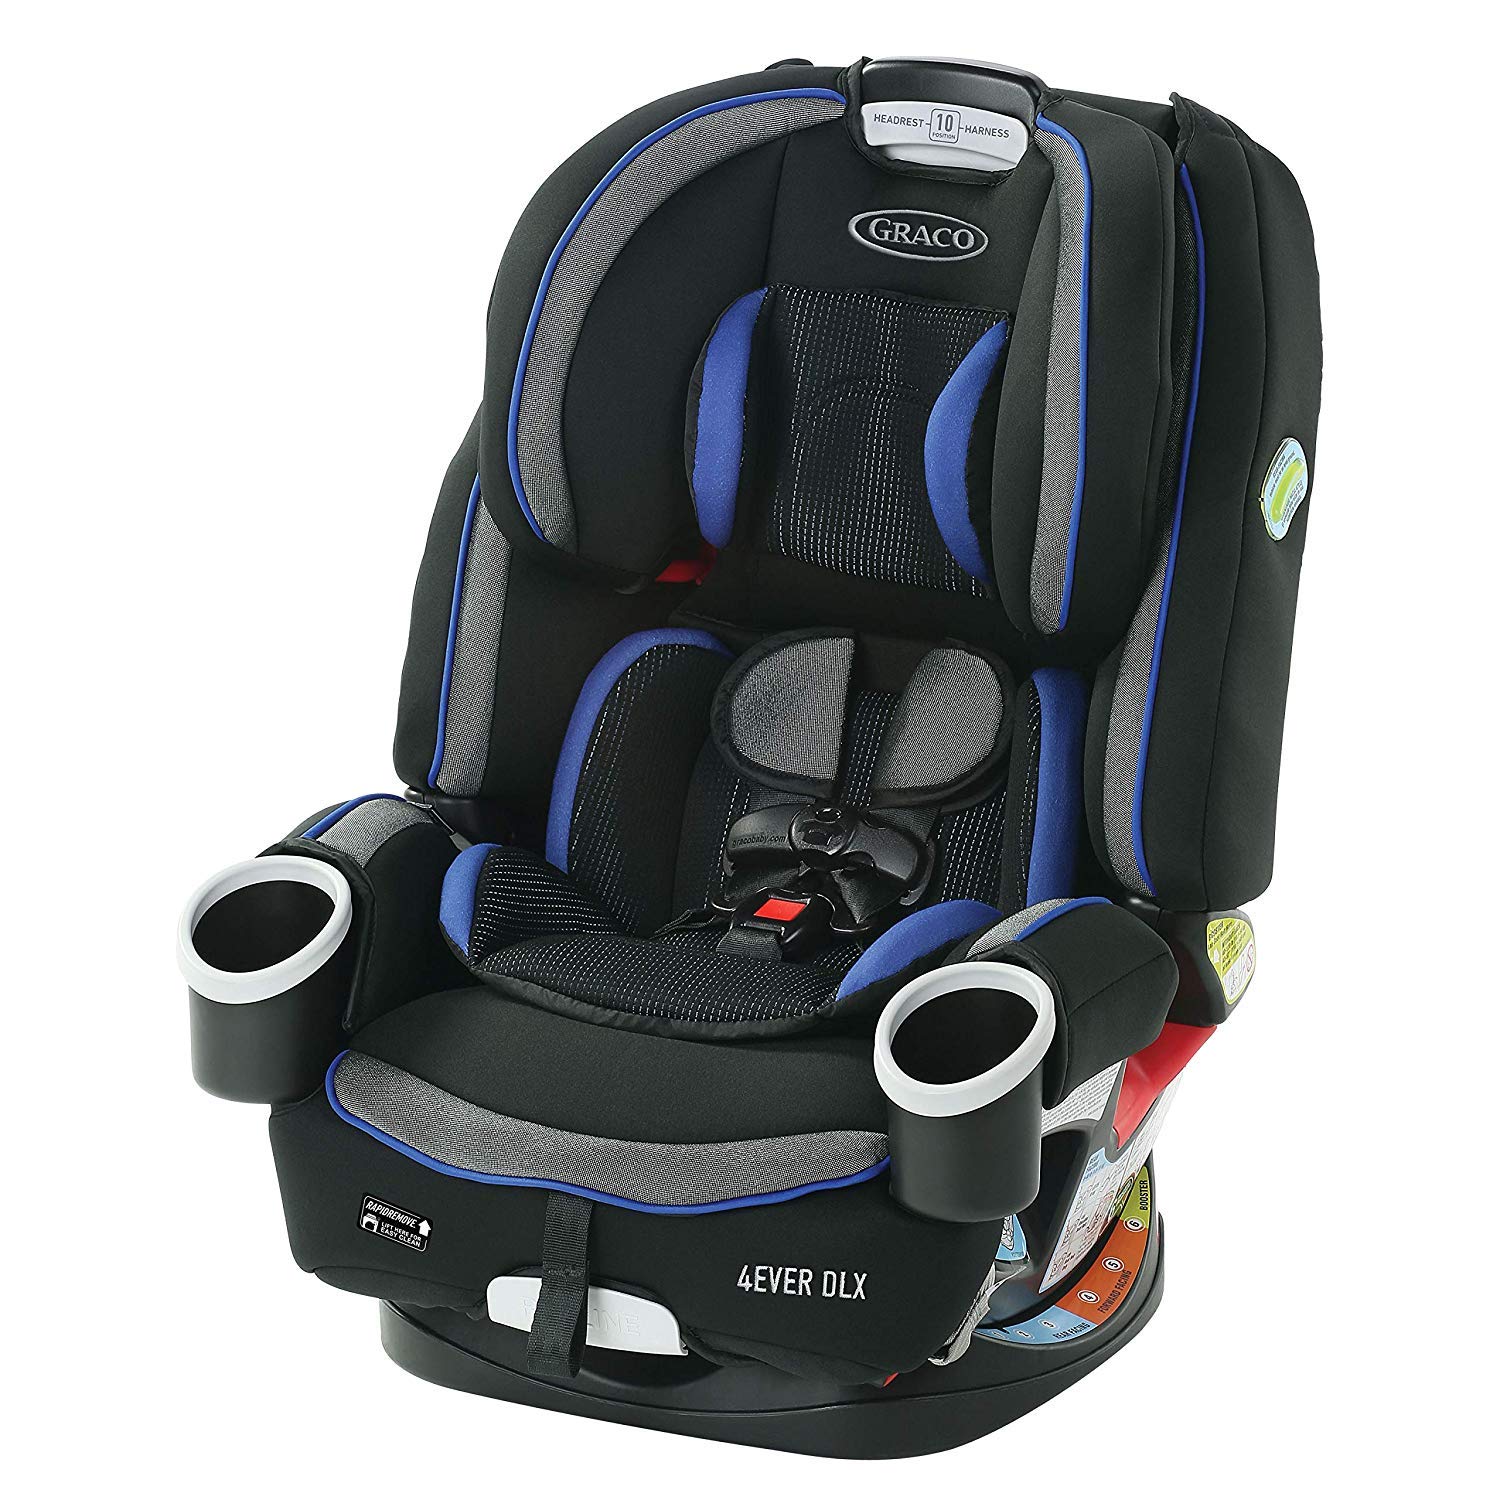 Graco 4Ever DLX 4 in 1 Car Seat | Infant to Toddler Car Seat, with 10 Years of Use, Kendrick $195.28 at Amazon